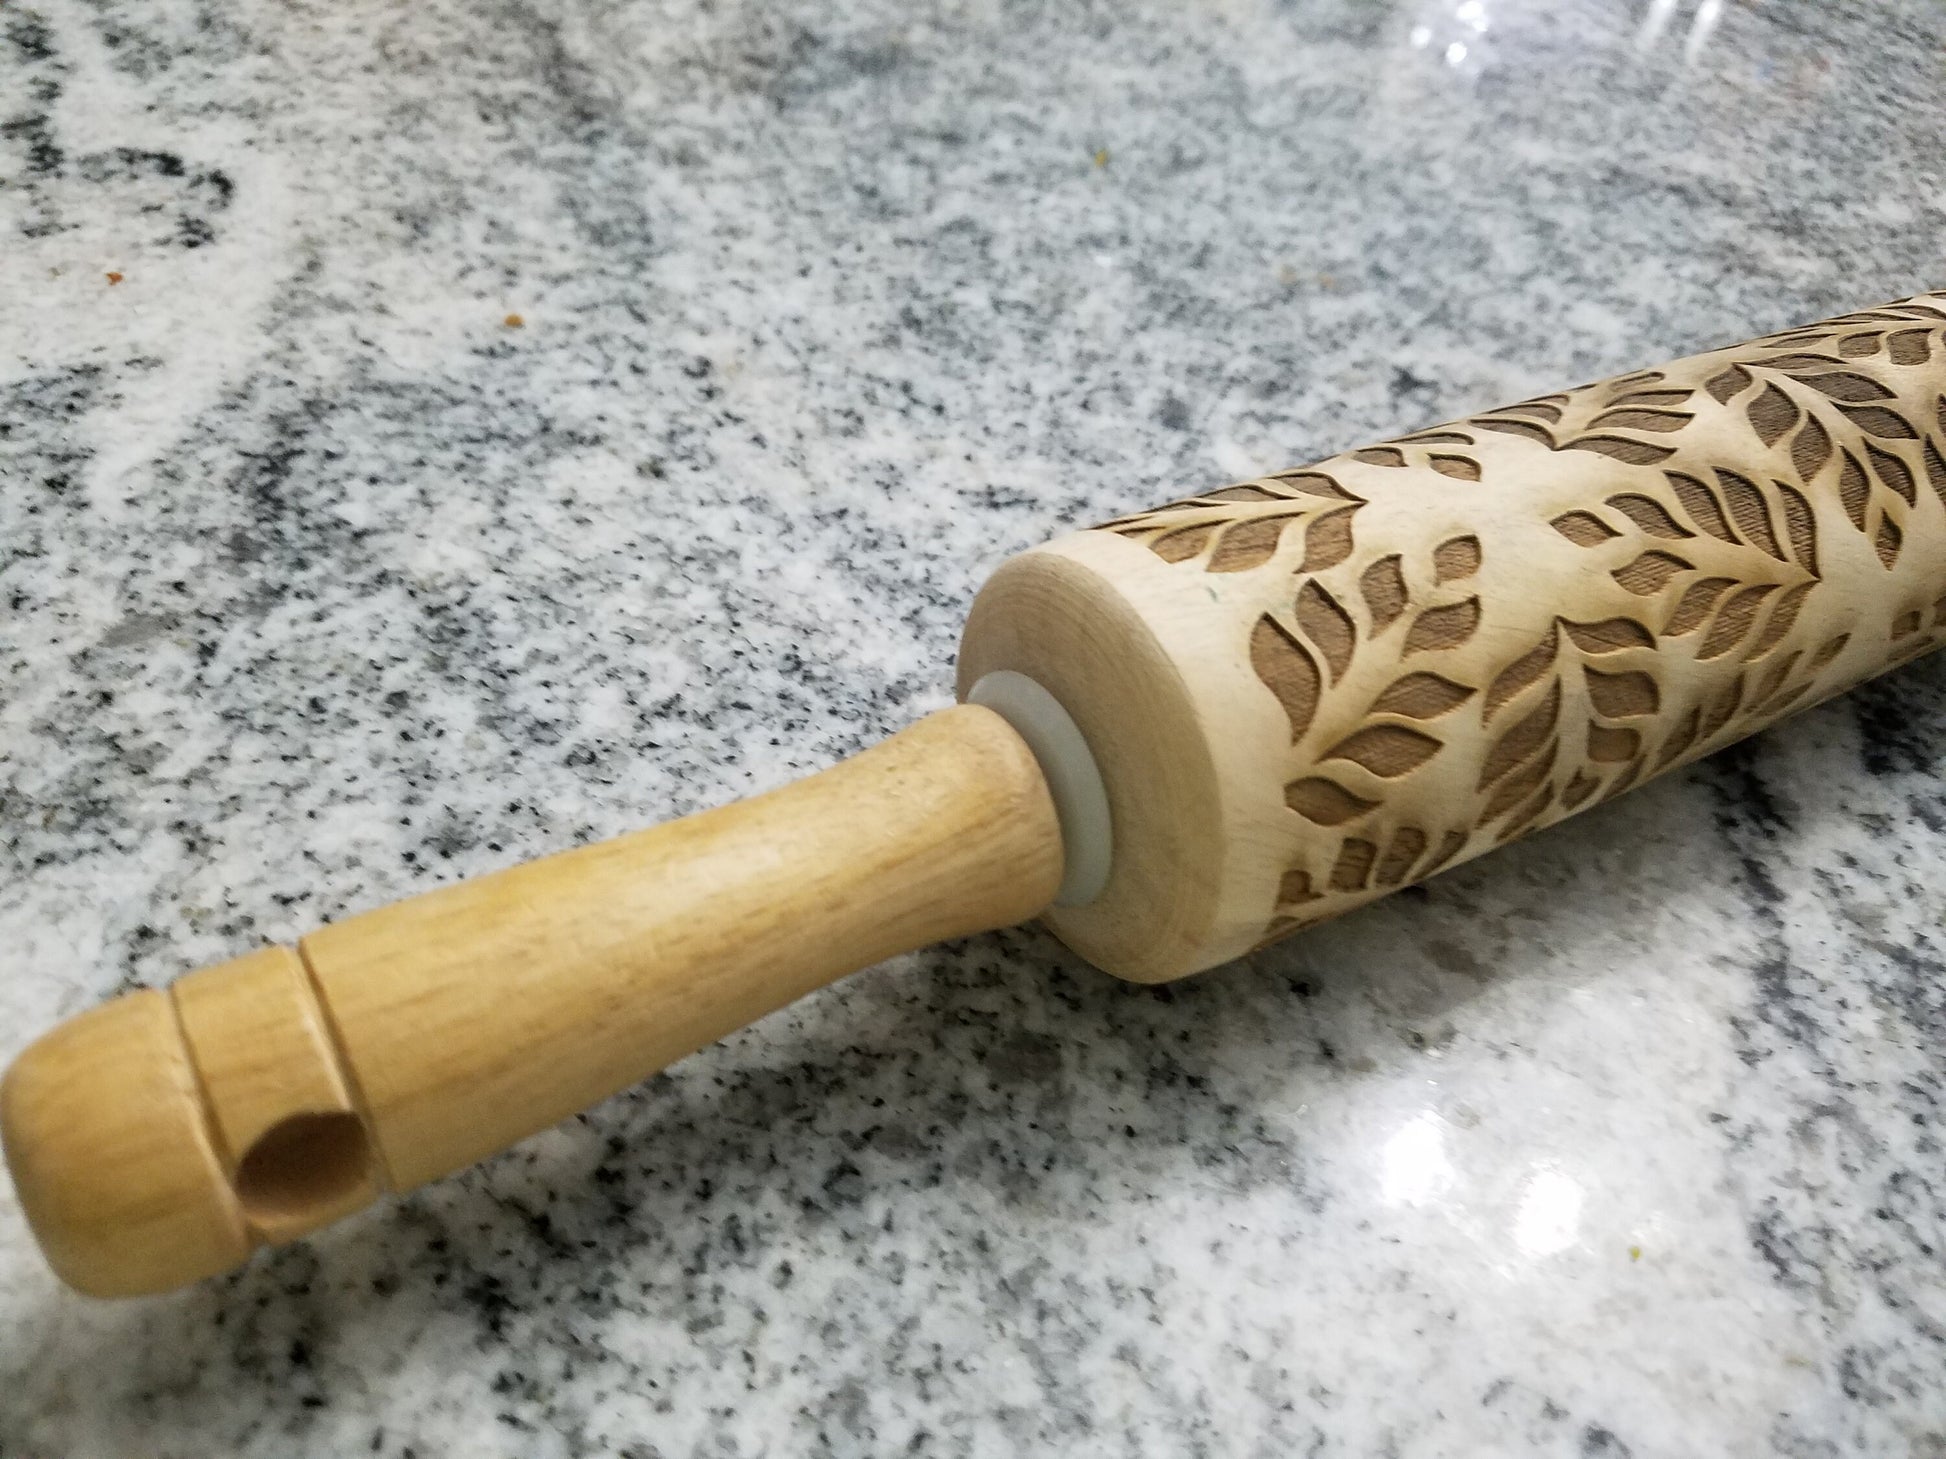 Leaf, Leaves, Floral Pattern, Geometric, 10 Inch Rolling Pin, Pie Crust, Texture, Embossed, Engraved, Wood, Cookie Stamp, Wooden, pottery